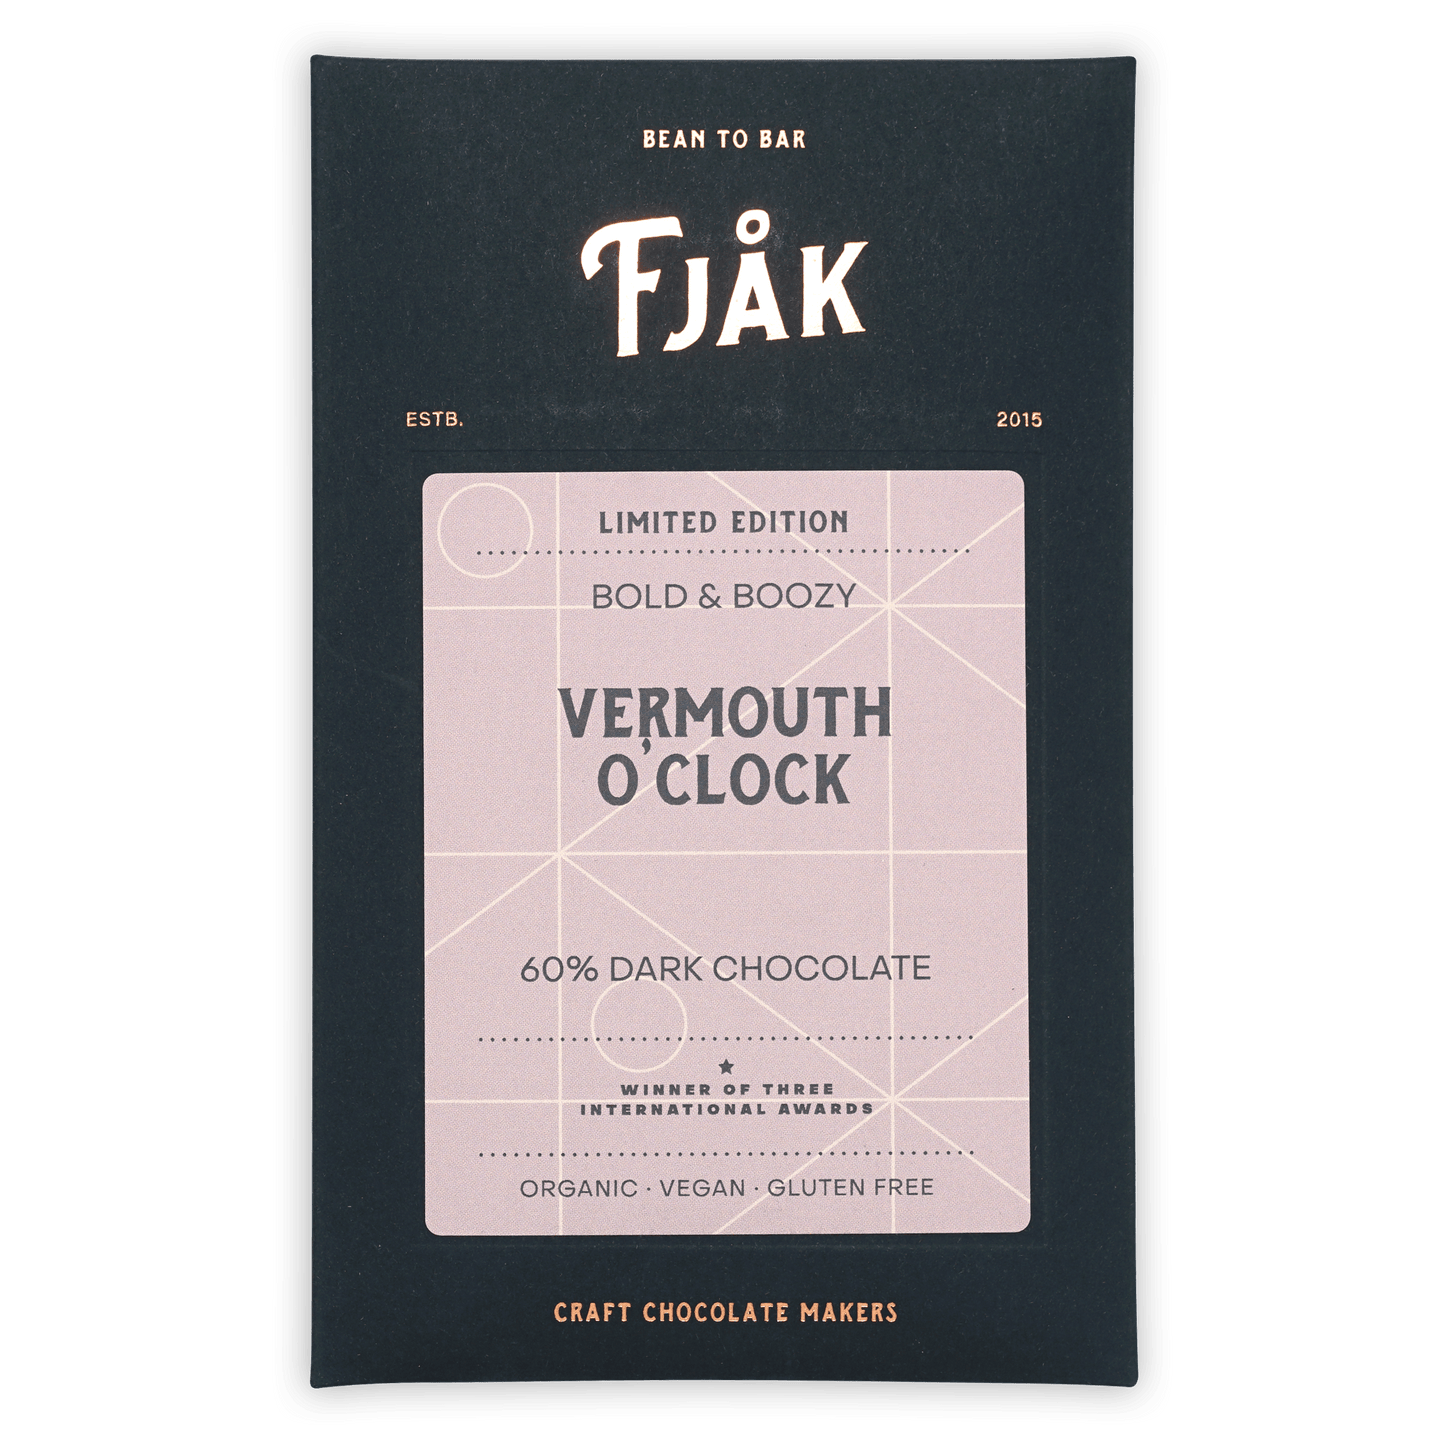 Fjak Vermouth O'Clock Chocolate (Limited Edition)